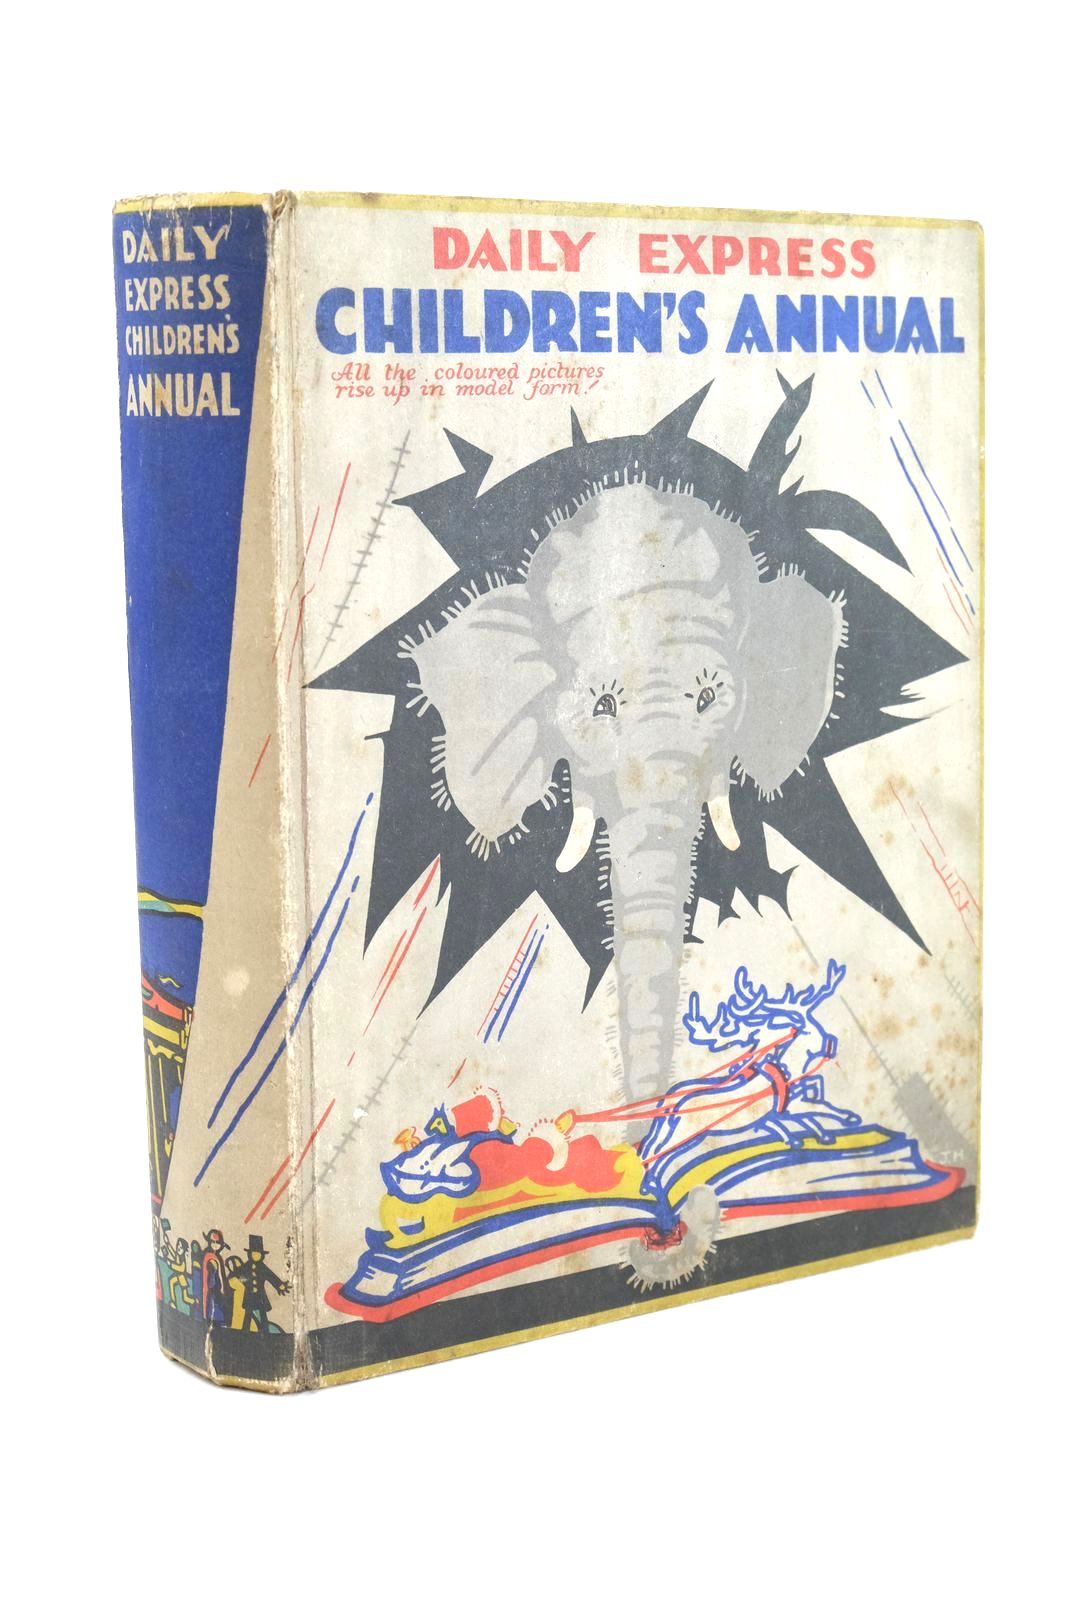 Photo of DAILY EXPRESS CHILDREN'S ANNUAL No. 3 written by Giraud, S. Louis Tourtel, Mary published by Daily Express (STOCK CODE: 1324984)  for sale by Stella & Rose's Books